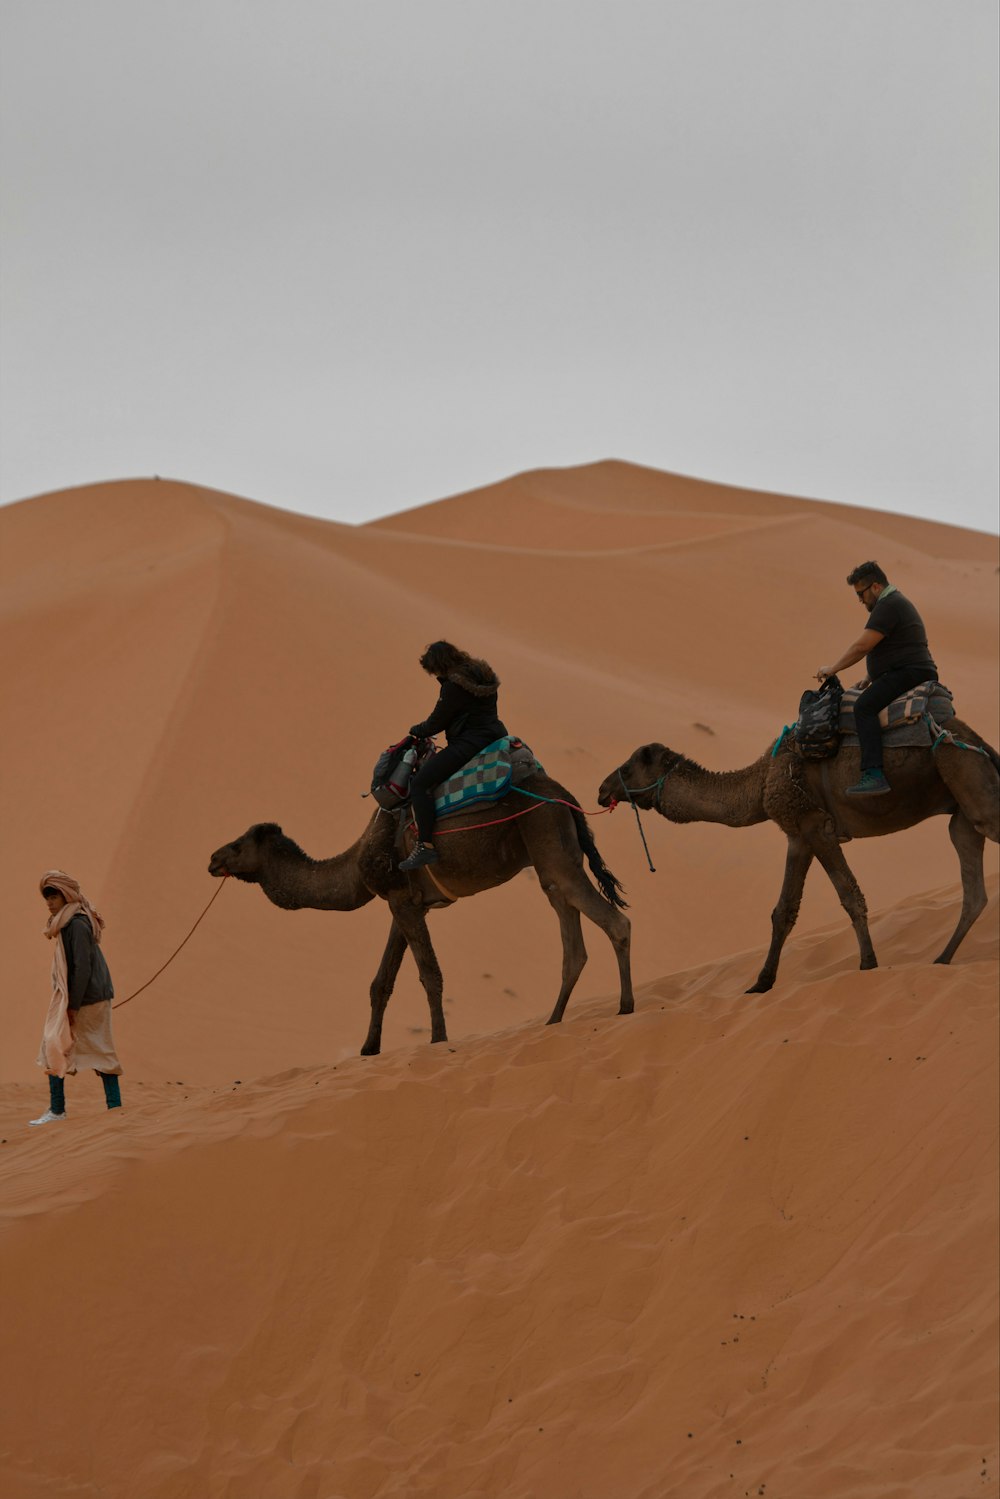 three people riding camels in the desert